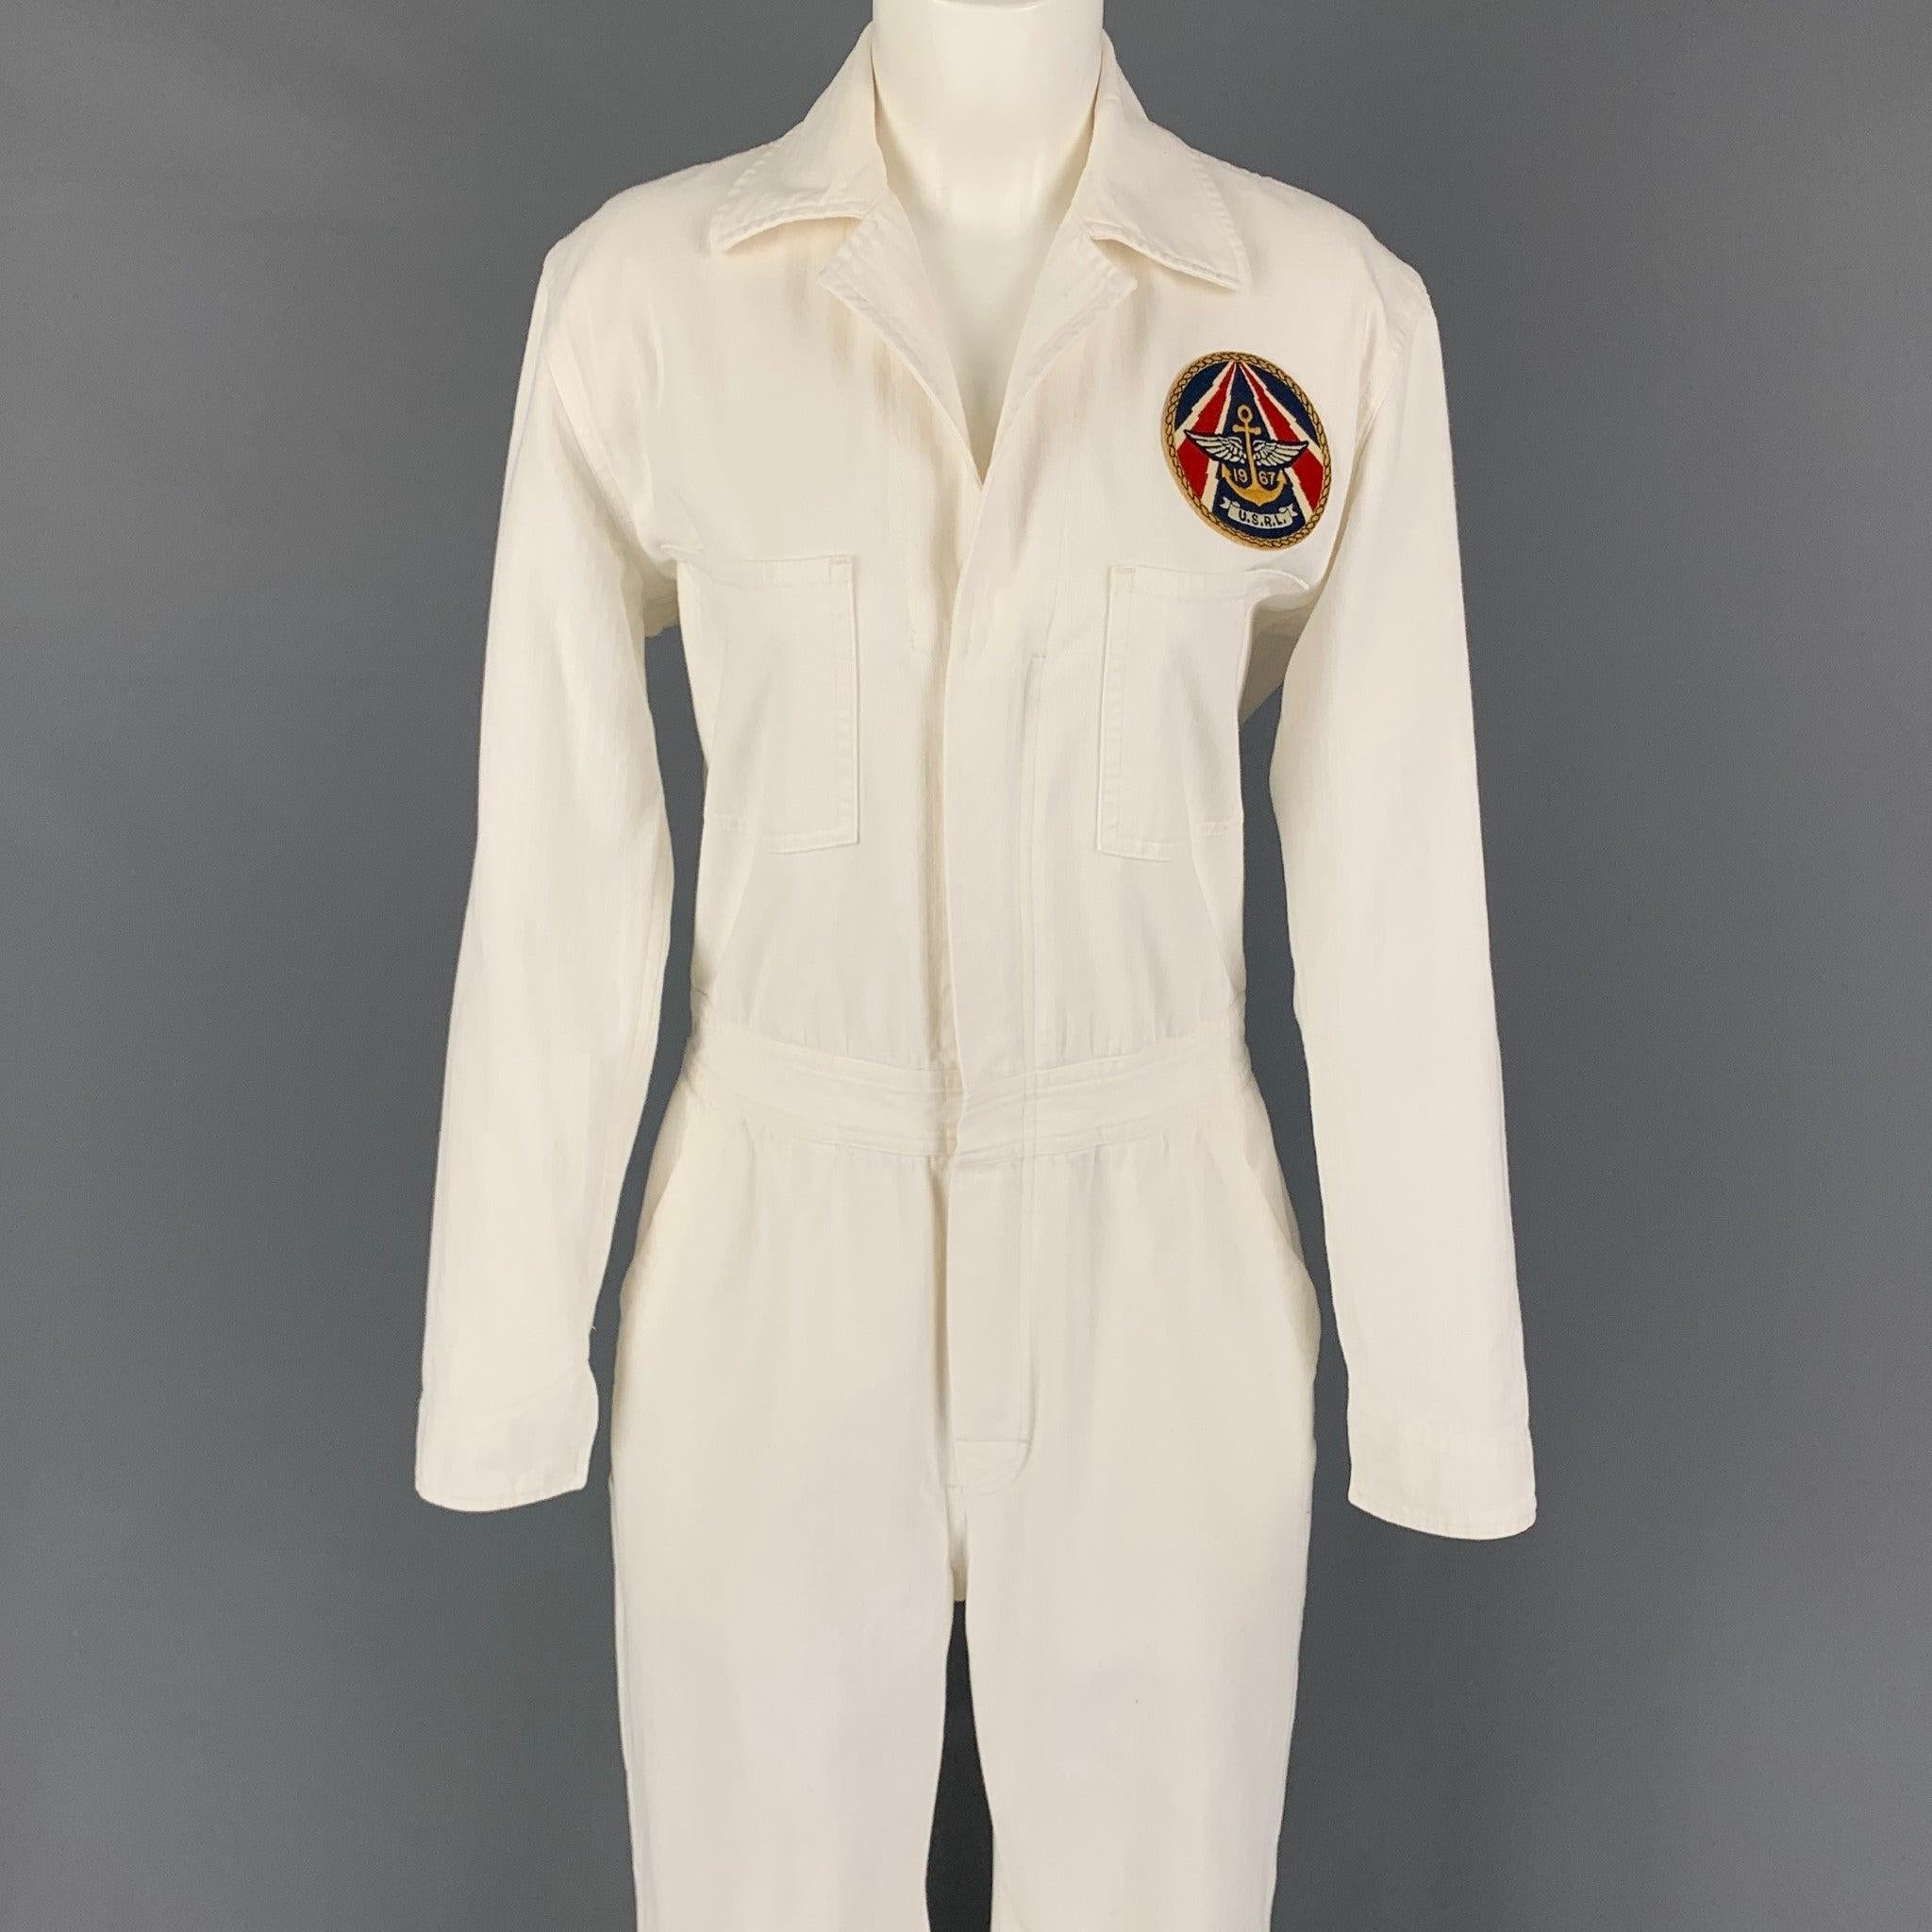 RALPH LAUREN Collection jumpsuit comes in a cream cotton featuring a camp collar, military patch, long sleeves, front pockets, and a zip up closure.
Very Good
Pre-Owned Condition. 

Marked:   8 

Measurements: 
 
Shoulder: 16 inches Bust:
38 inches